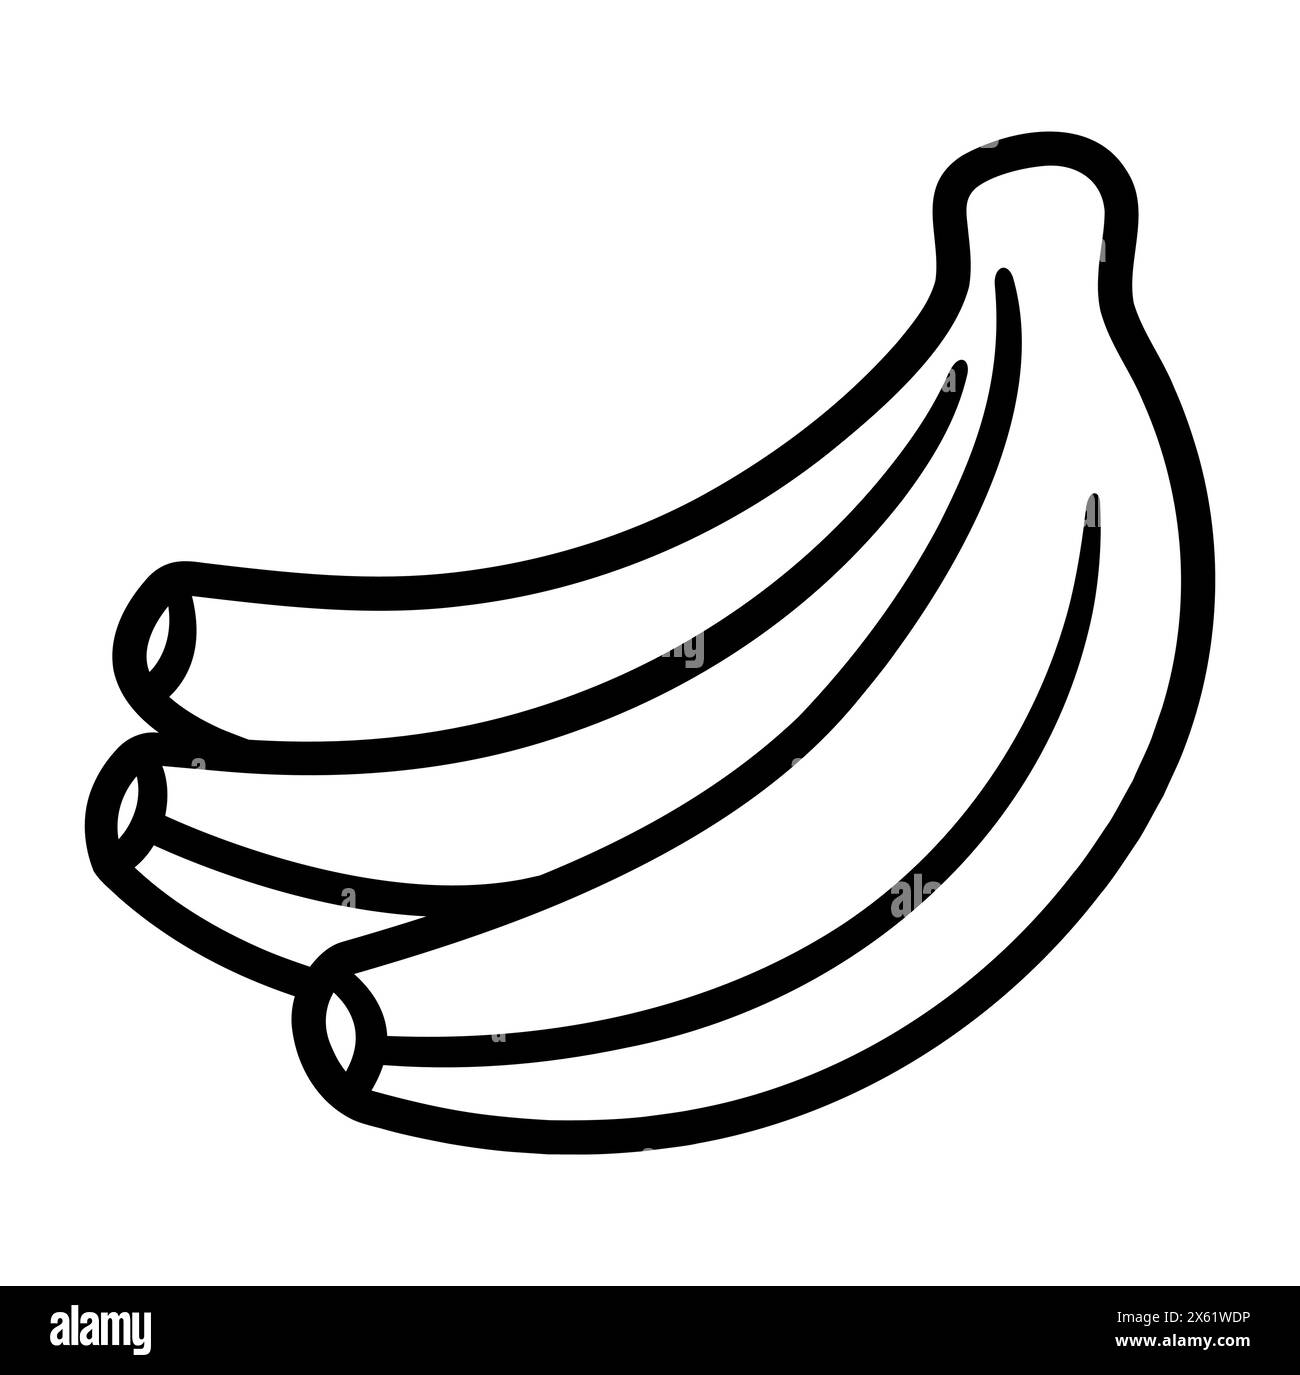 Hand drawn bananas doodle icon. Black and white banana bunch. Simple drawing, vector clip art illustration. Stock Vector